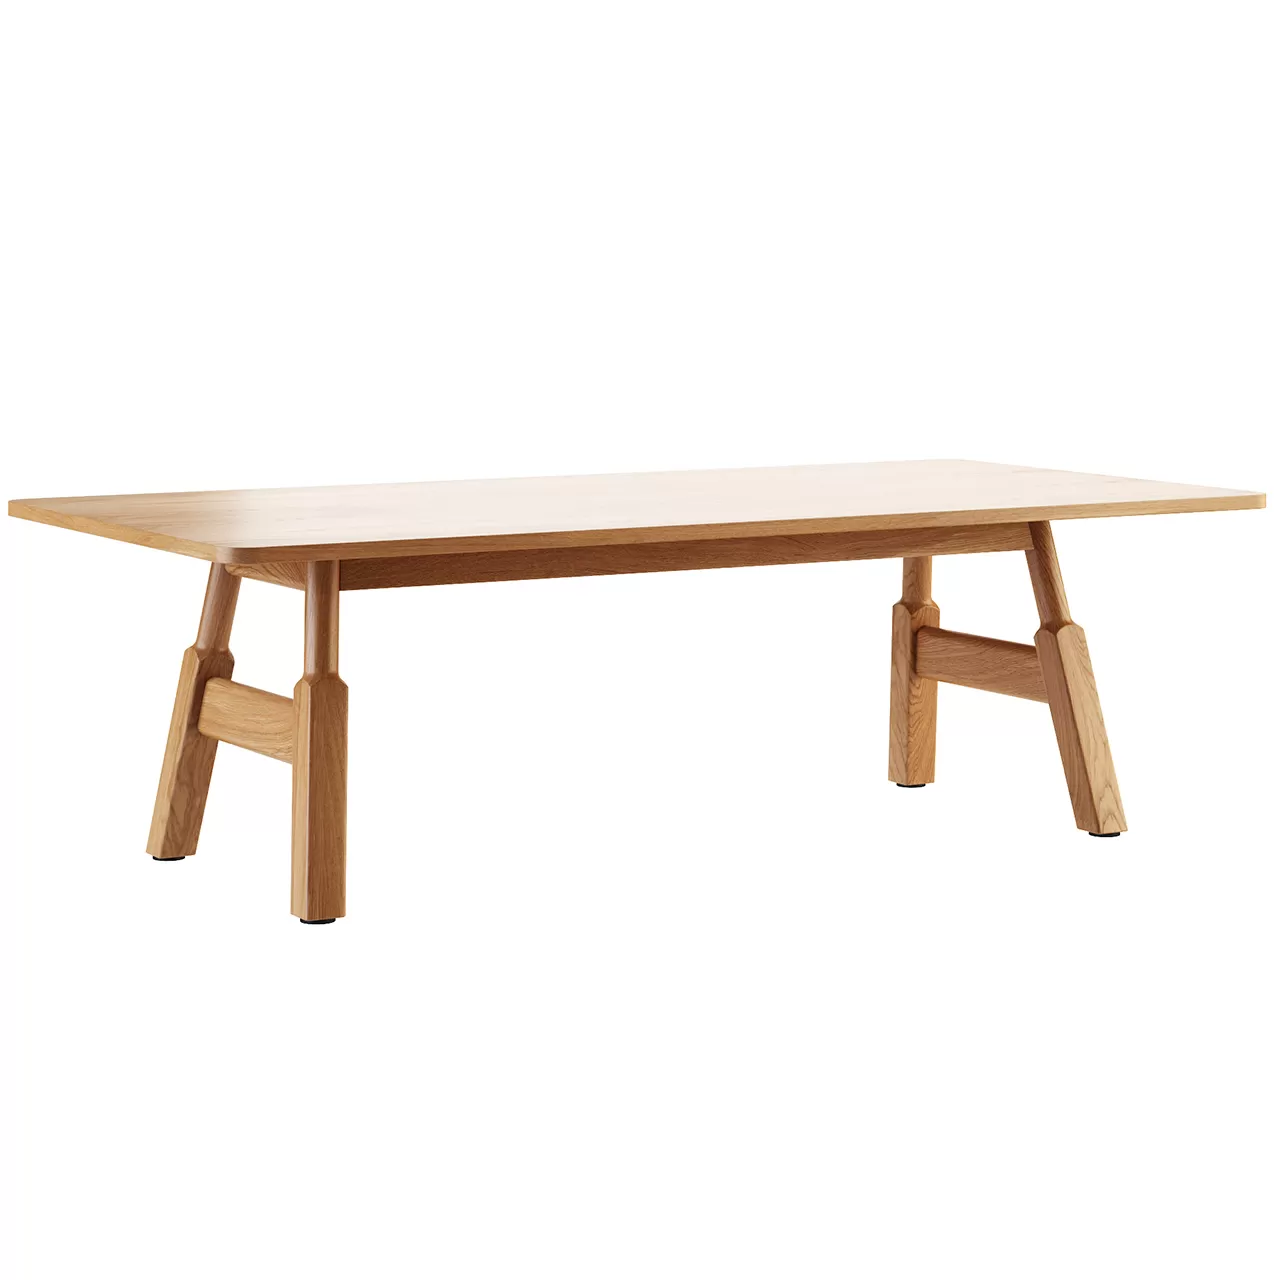 Furniture – ww1-240120-h73-table-by-karl-andersson-soner